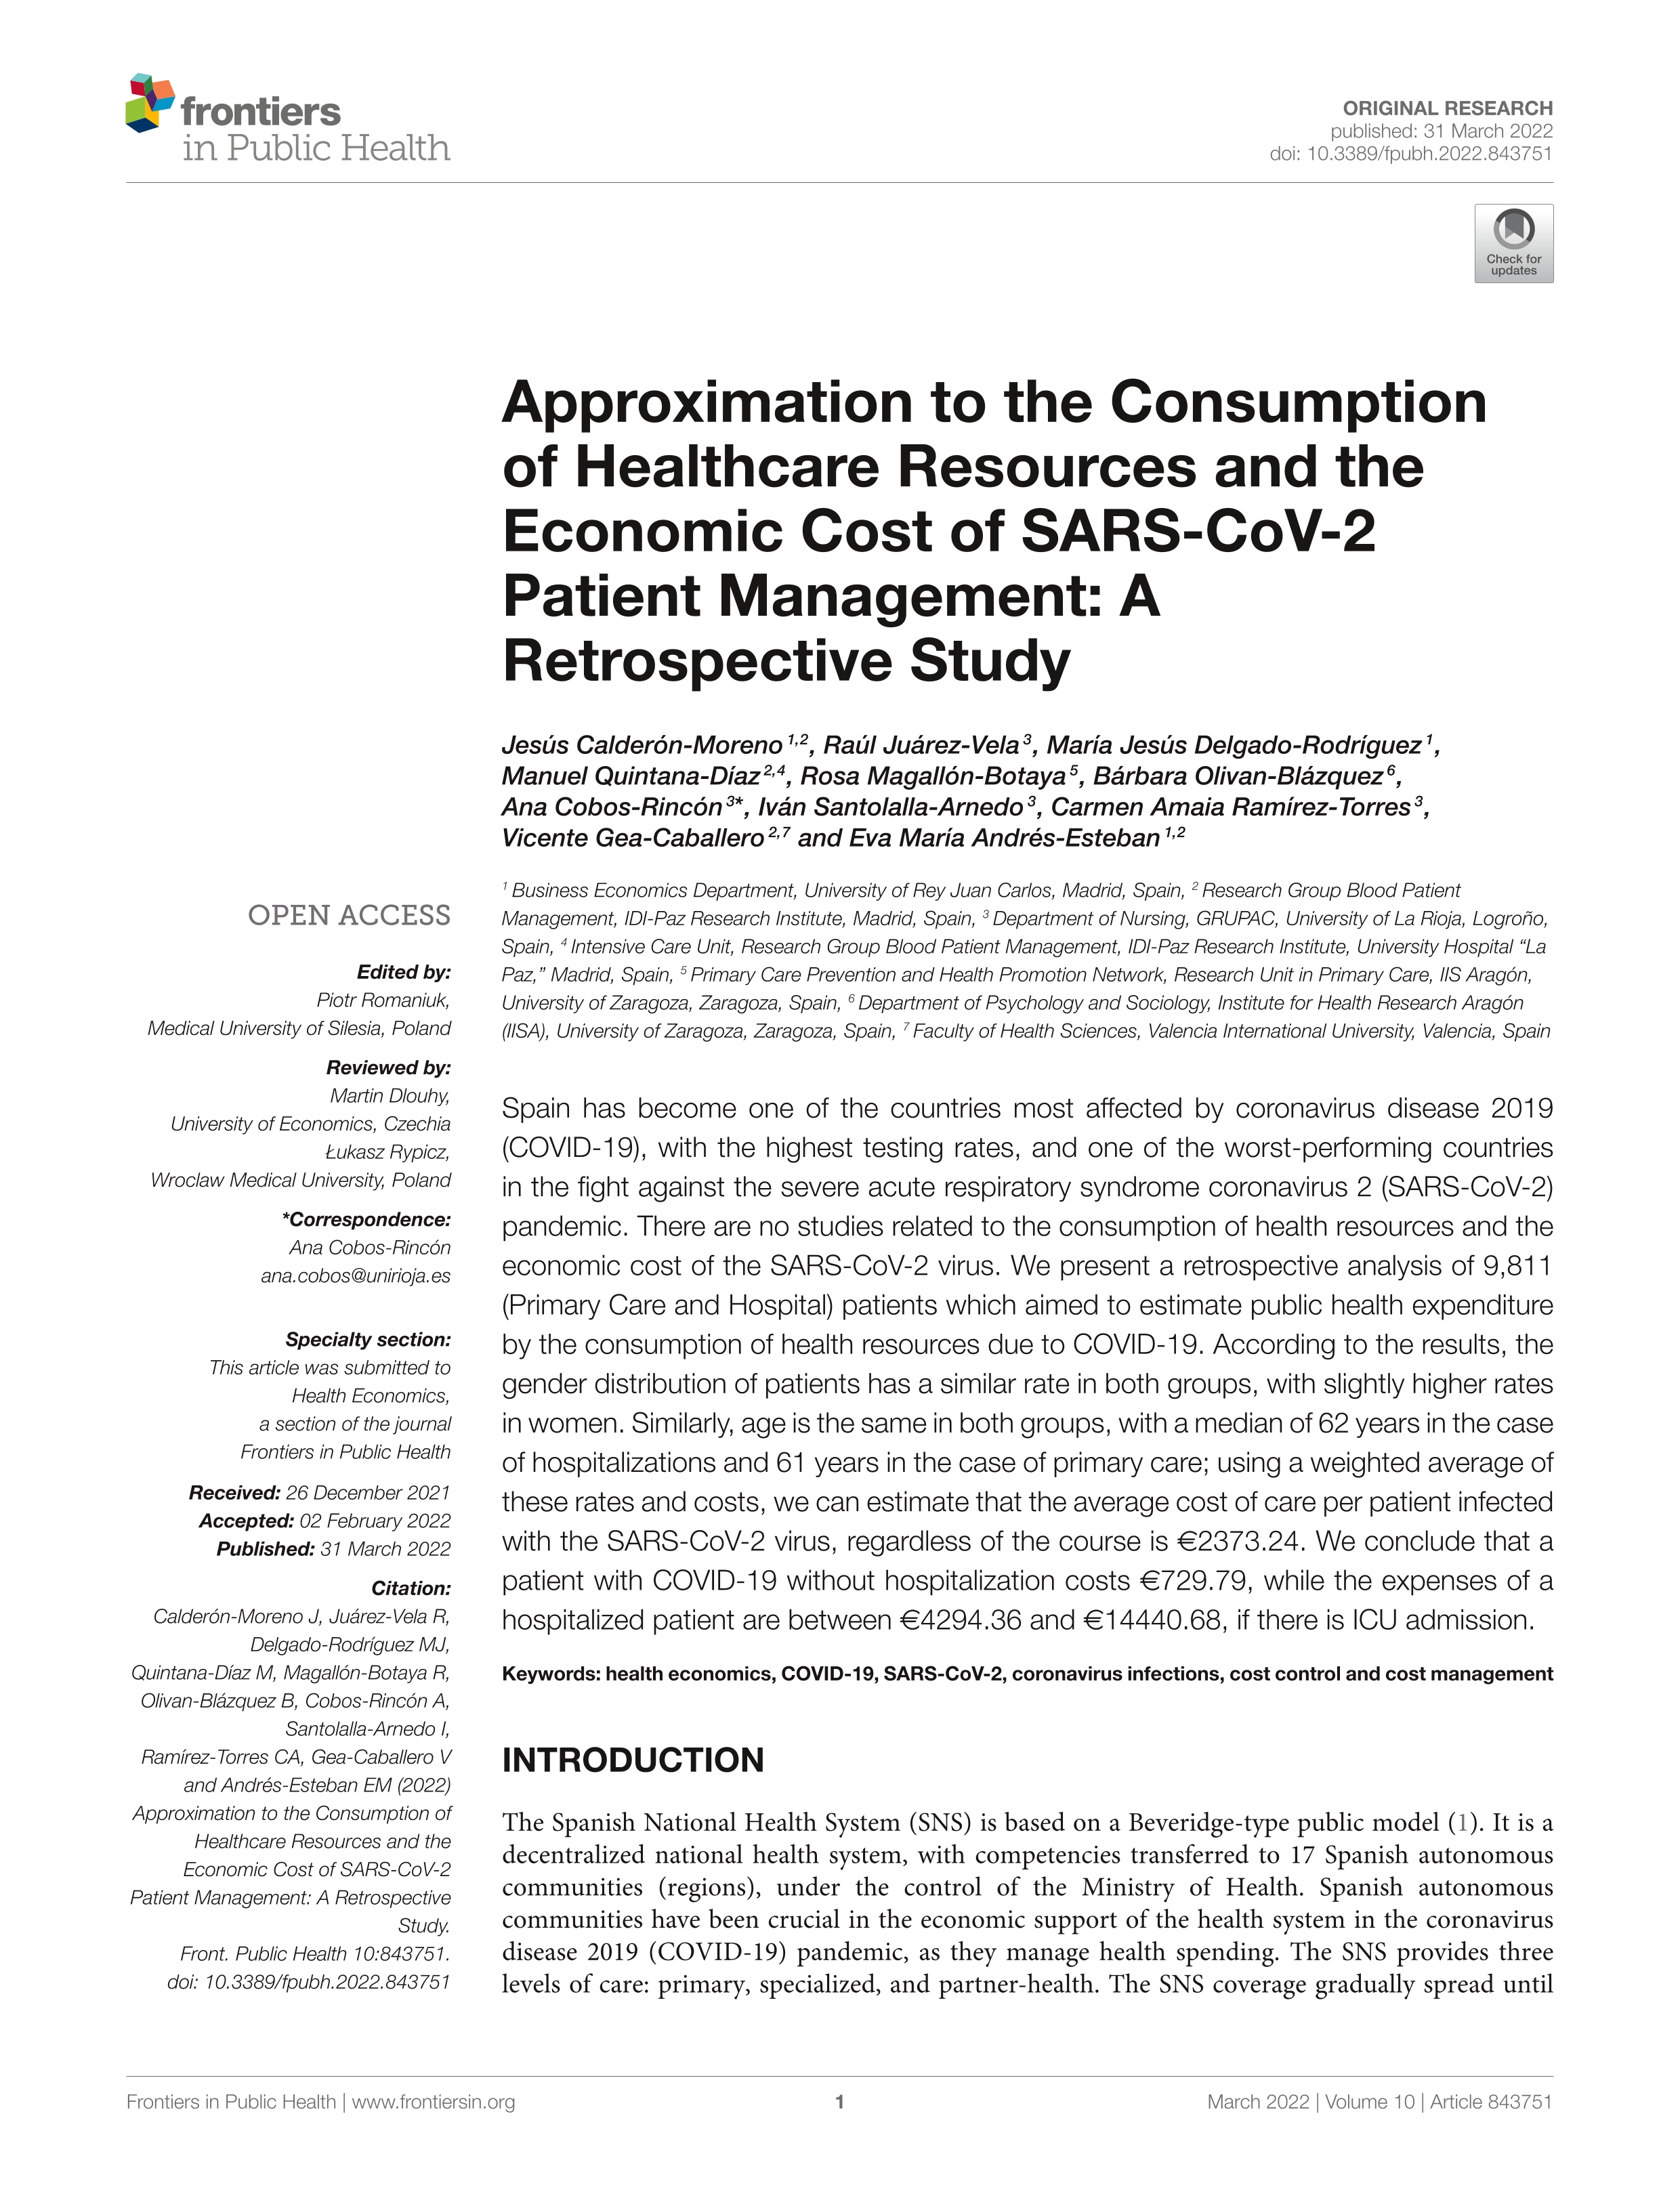 Approximation to the Consumption of Healthcare Resources and the Economic Cost of SARS-CoV-2 Patient Management: A Retrospective Study